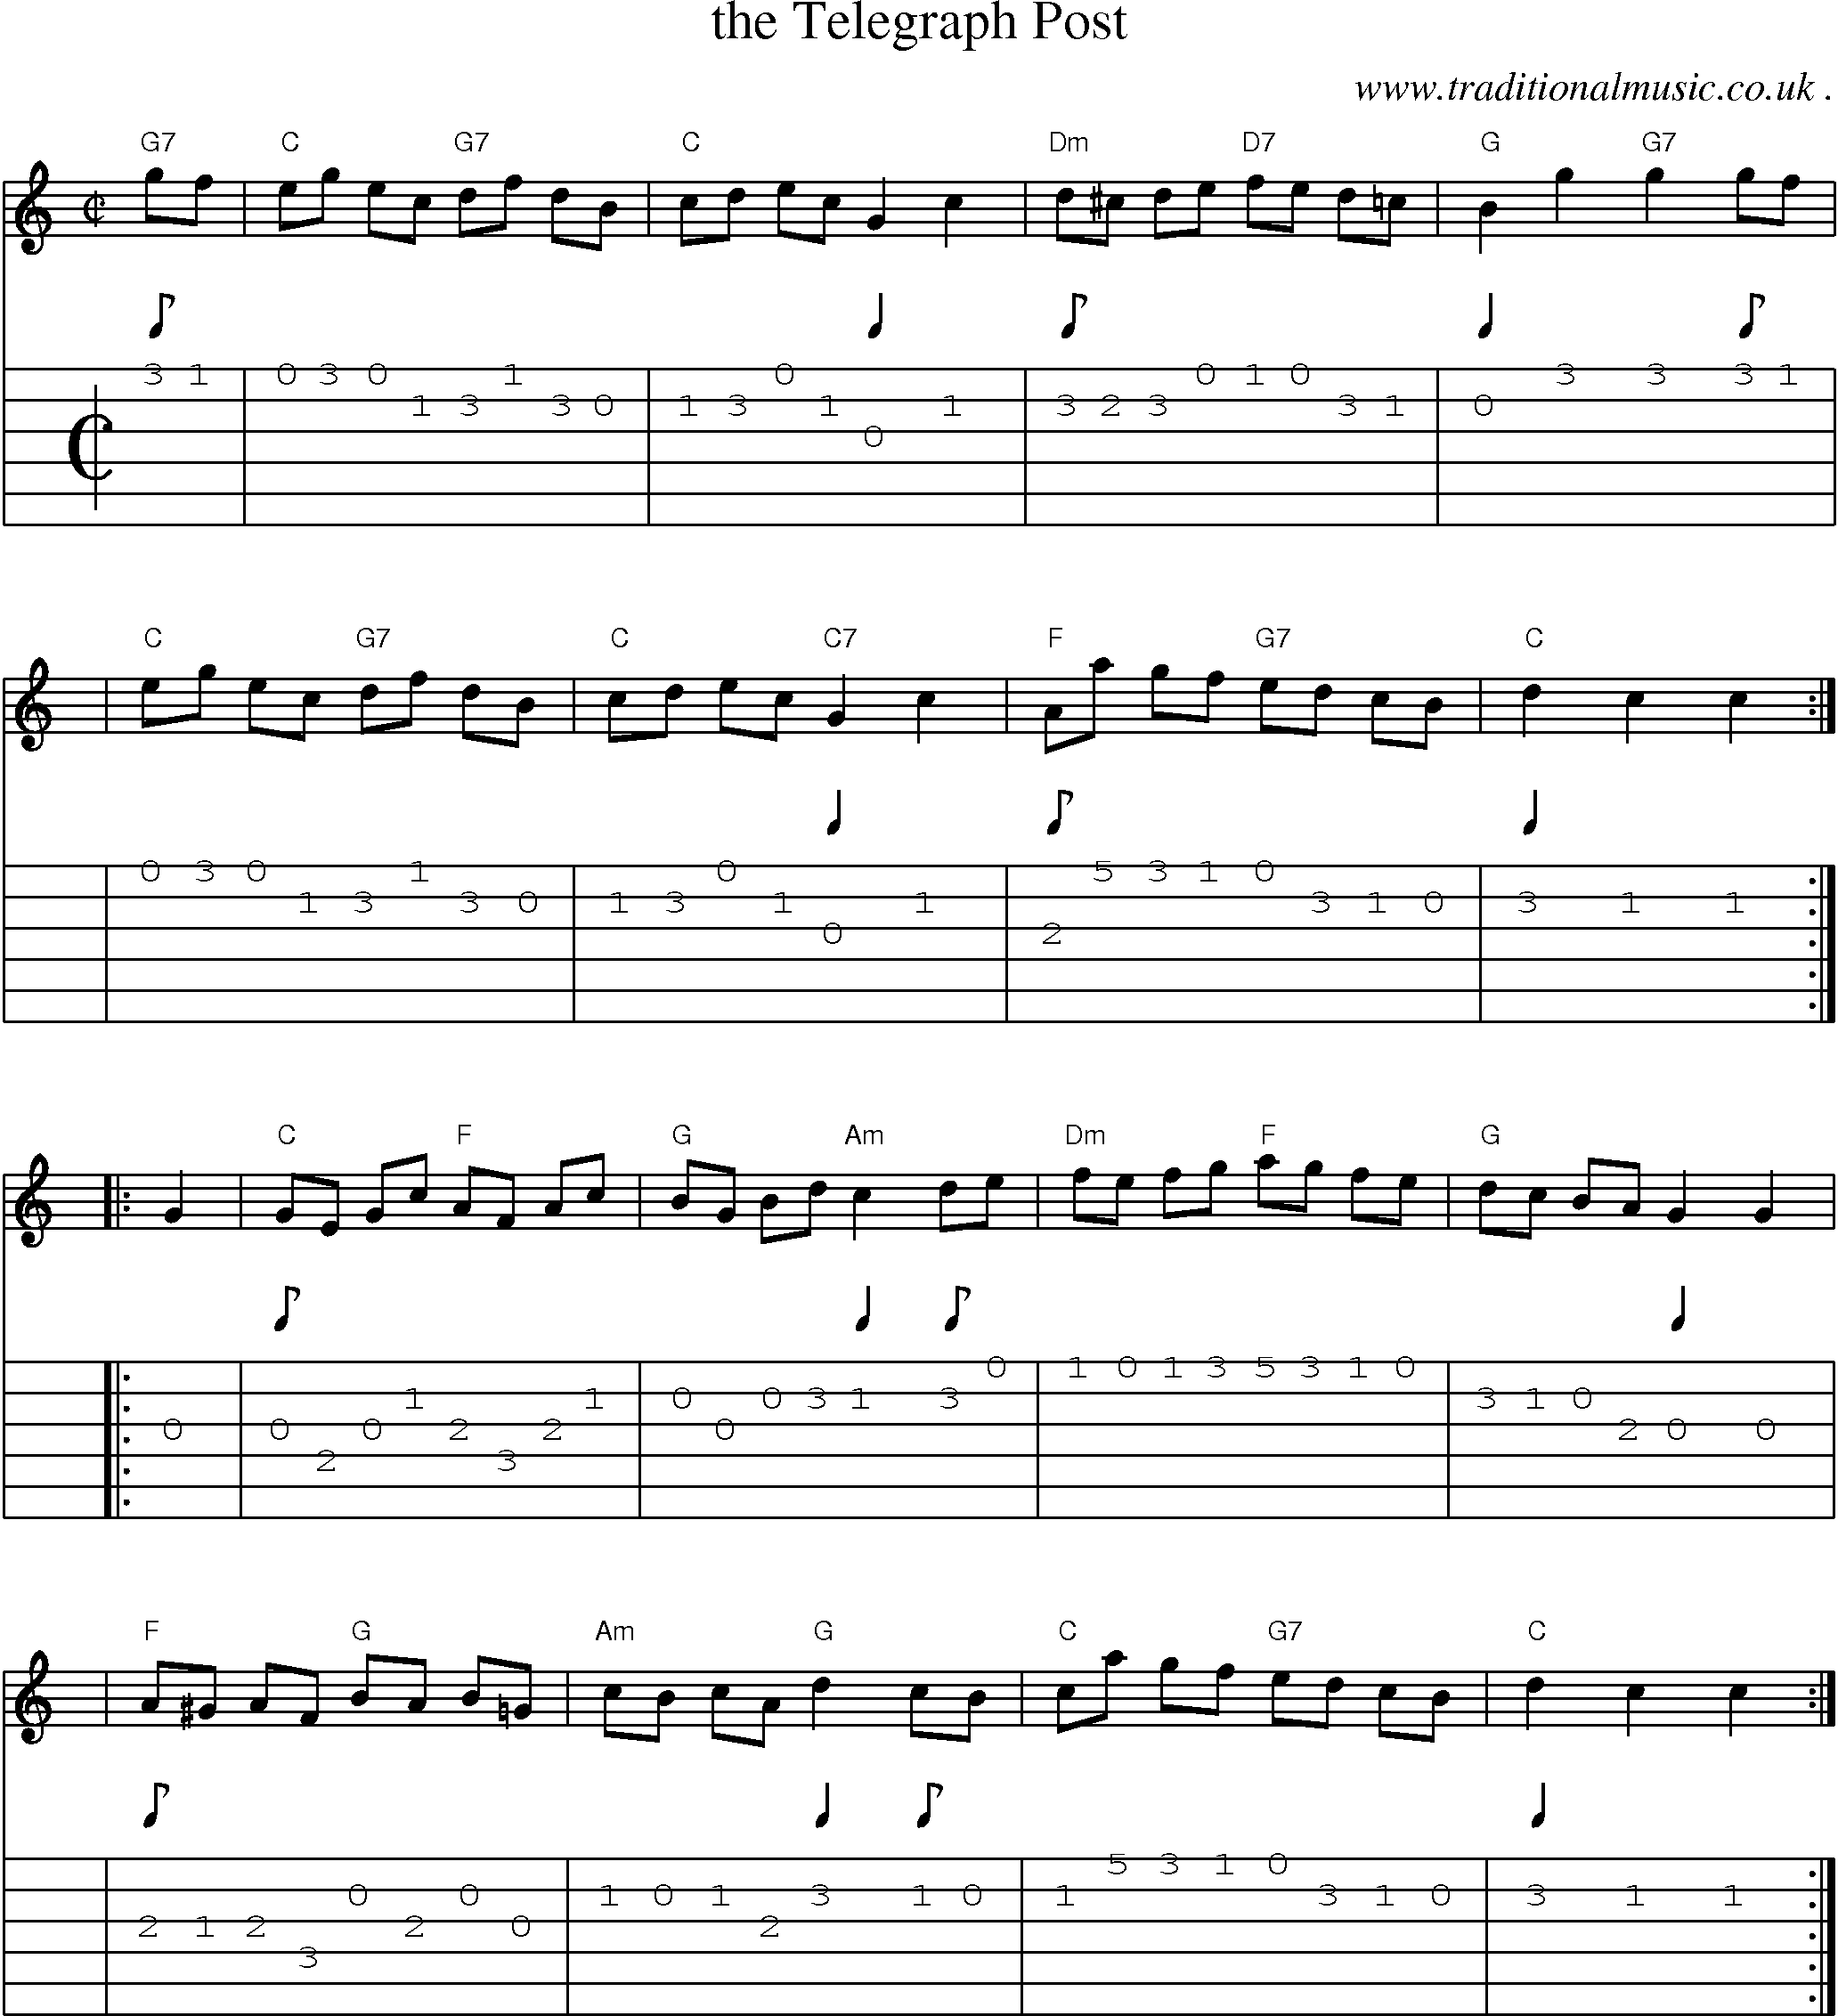 Sheet-music  score, Chords and Guitar Tabs for The Telegraph Post